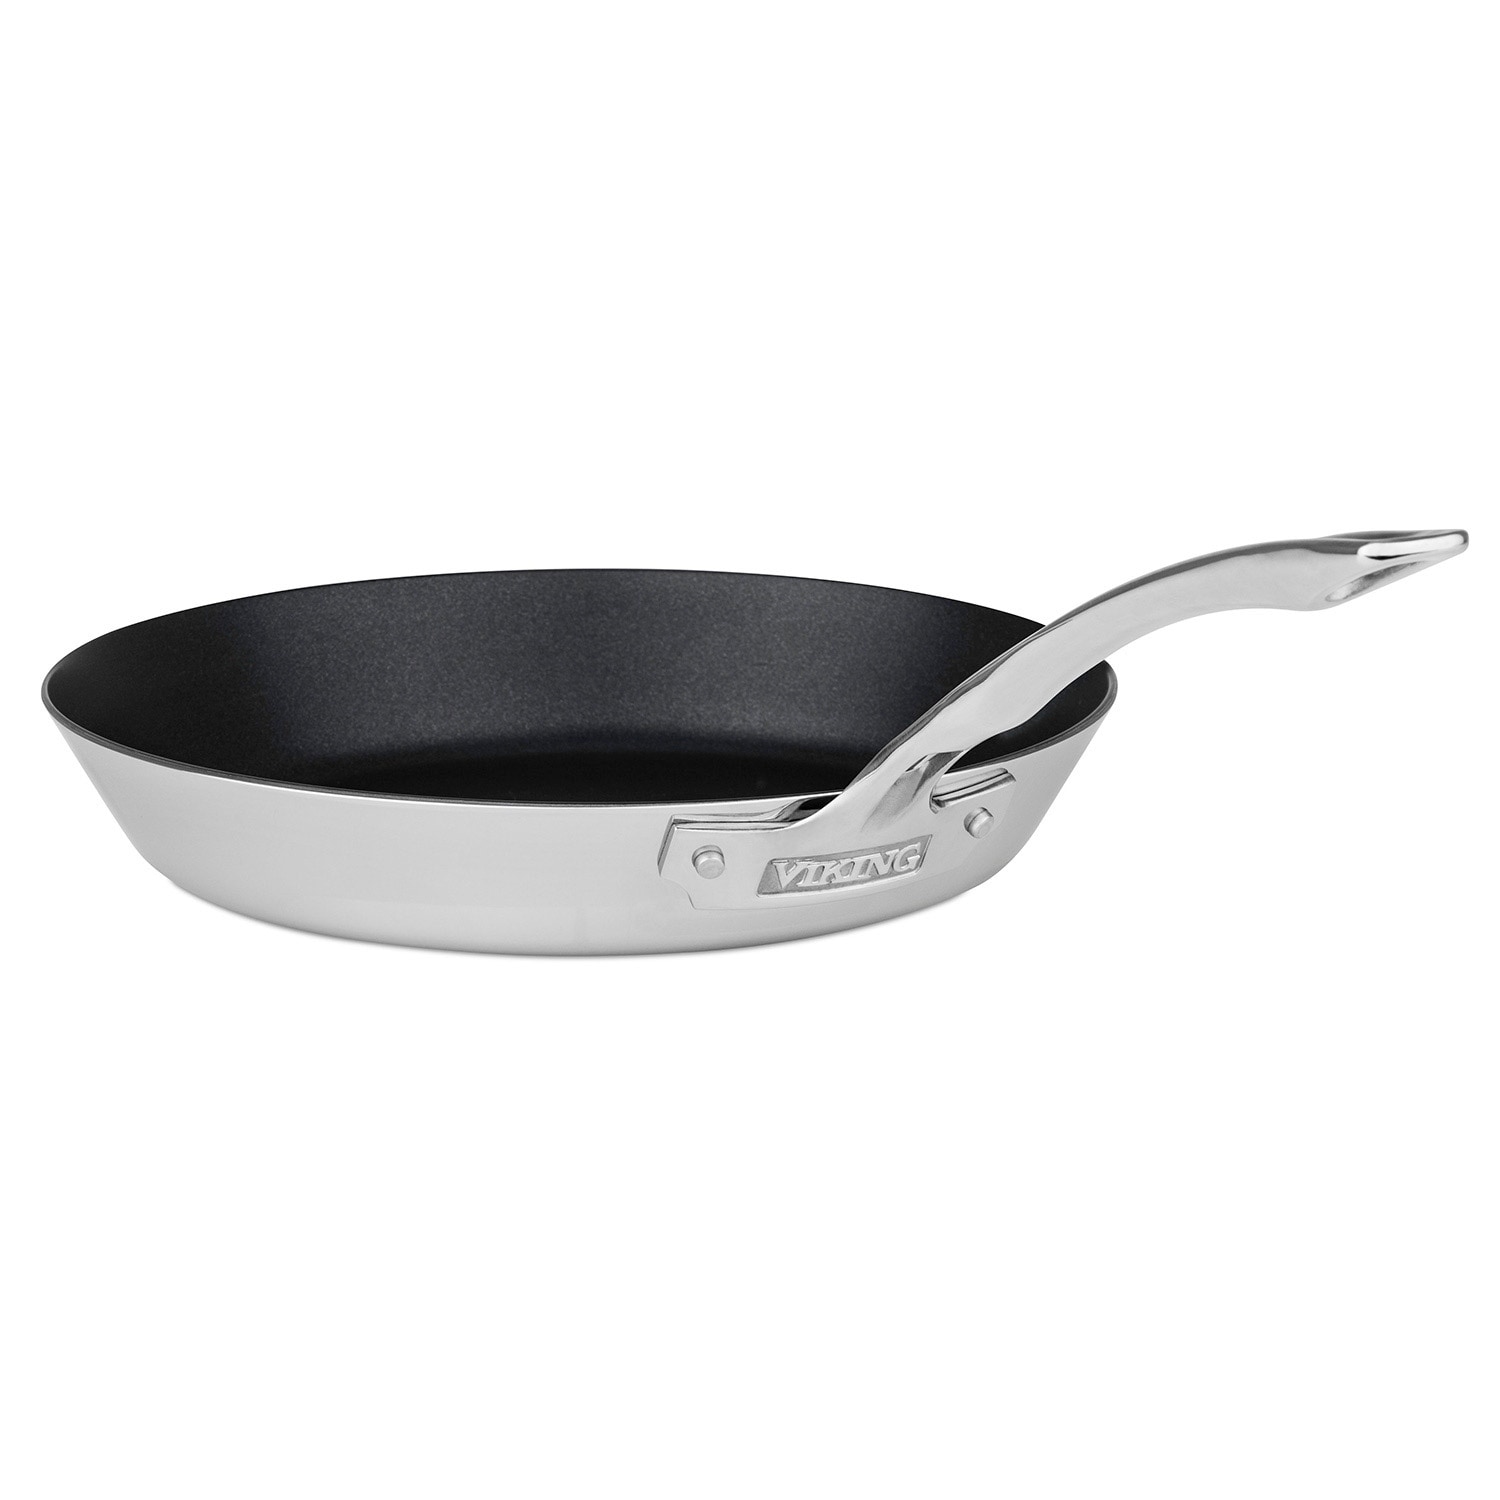 Viking Professional Nonstick 12 5-Ply Stainless Steel Covered Fry Pan